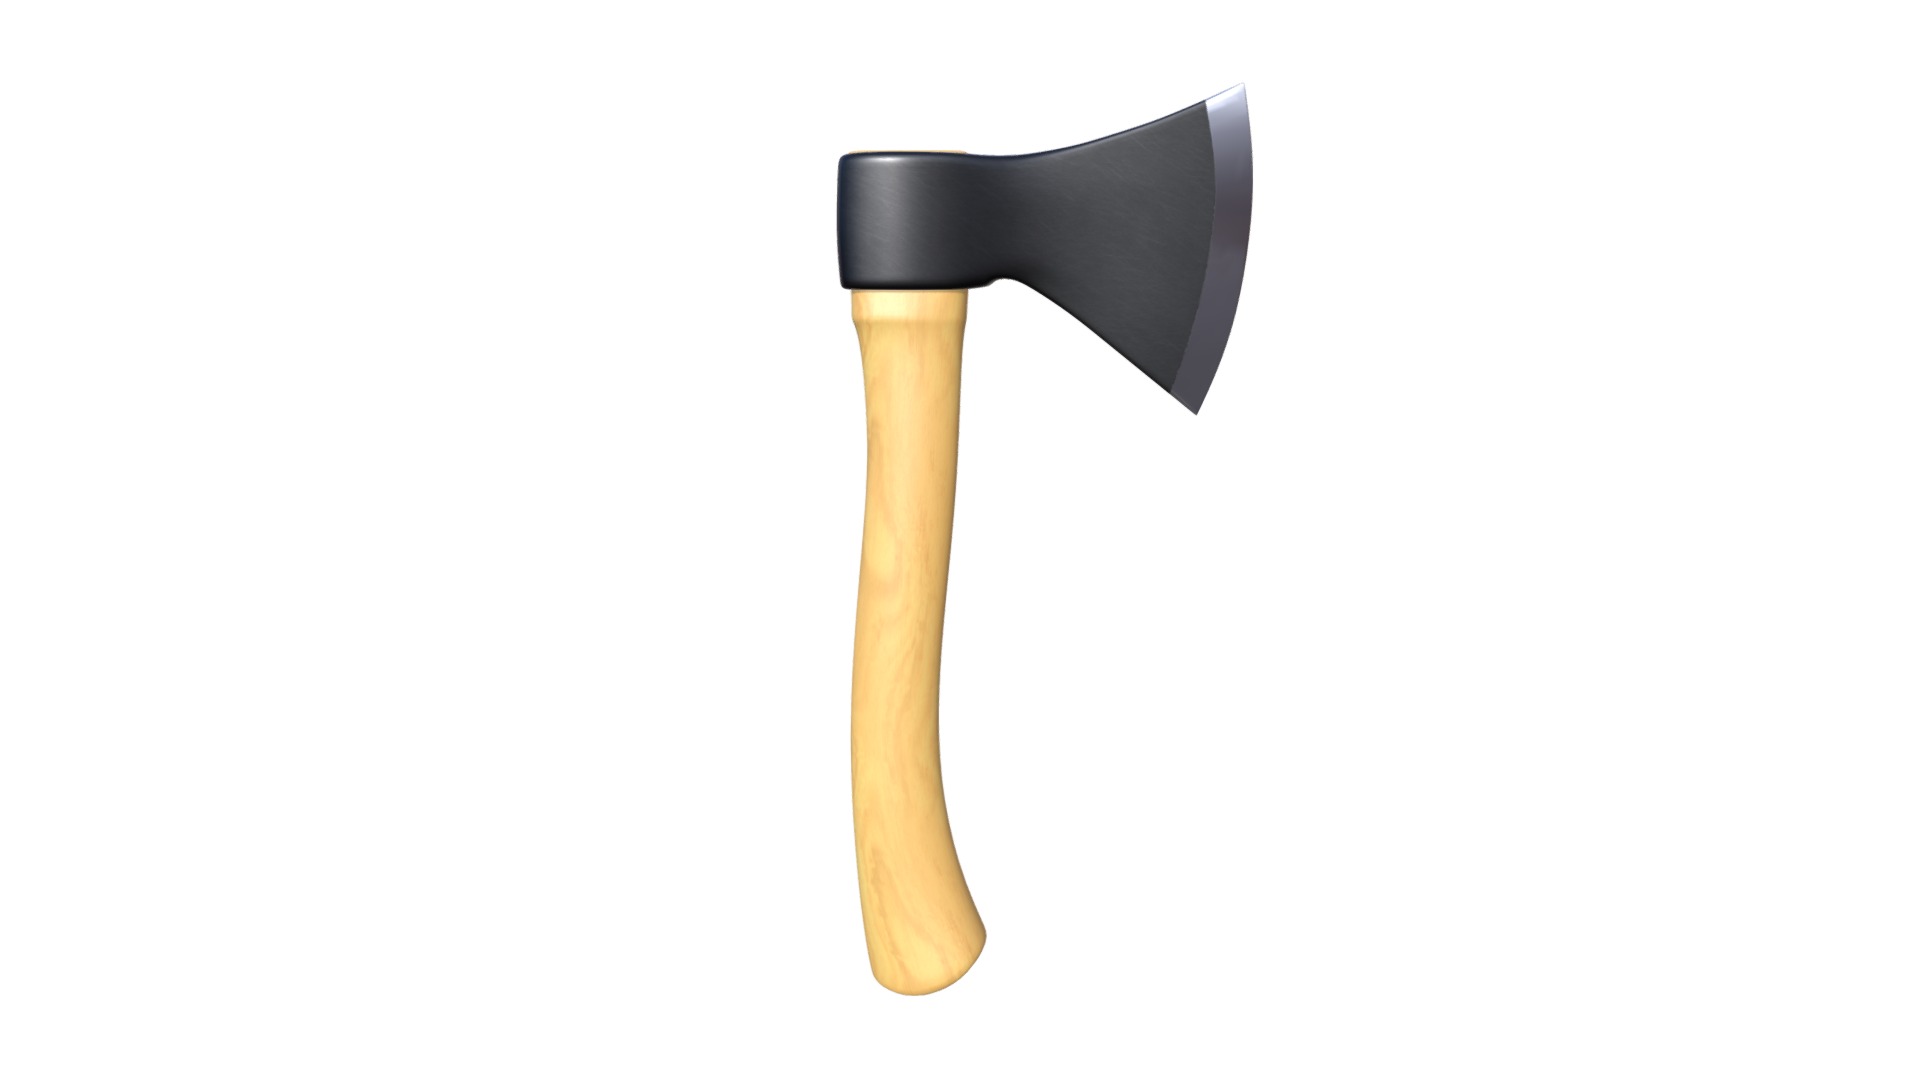 3D model Carpenter axe with wooden handle - This is a 3D model of the Carpenter axe with wooden handle. The 3D model is about a wooden spoon with a black handle.